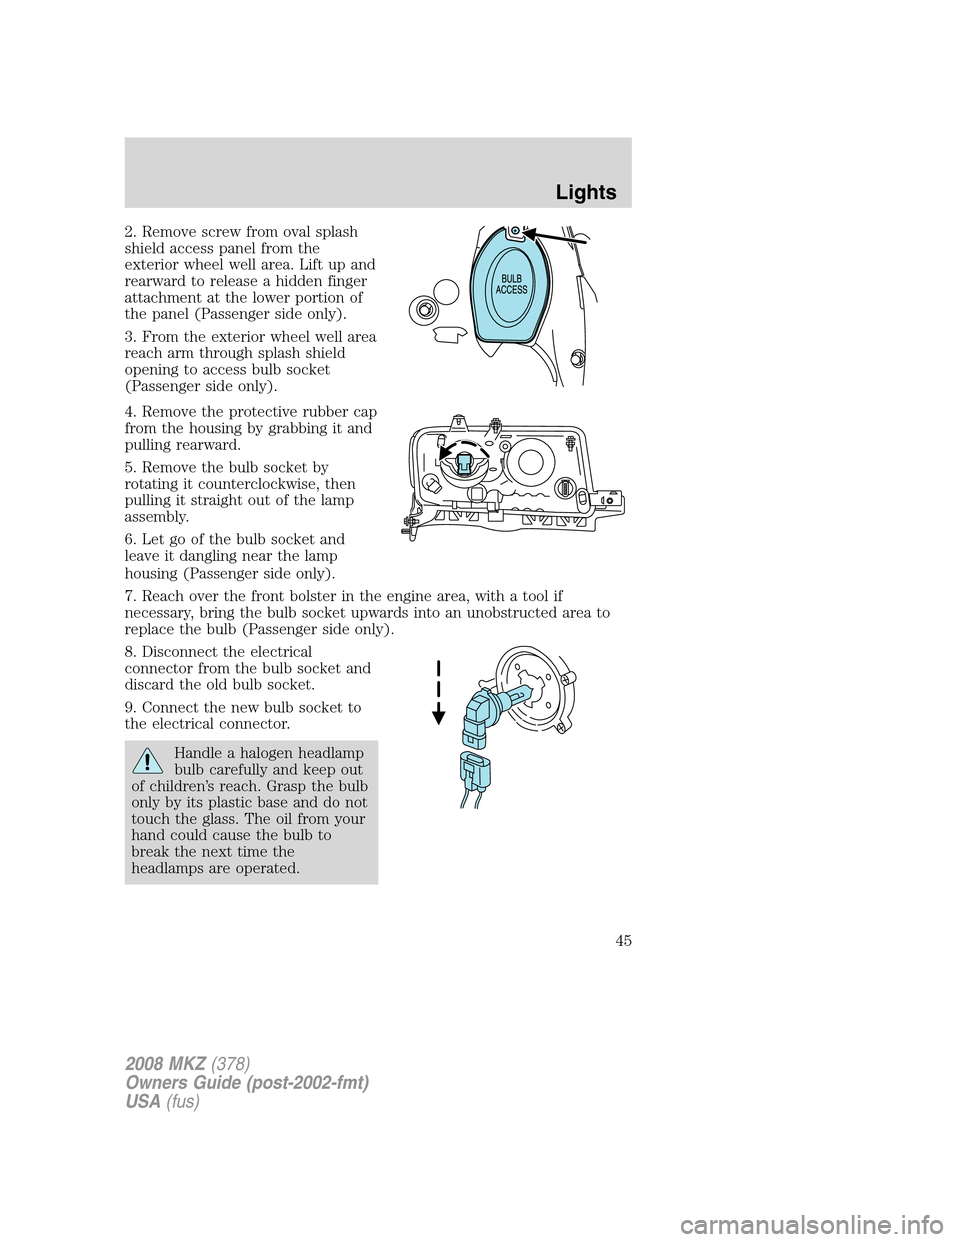 LINCOLN MKZ 2008 Service Manual 2. Remove screw from oval splash
shield access panel from the
exterior wheel well area. Lift up and
rearward to release a hidden finger
attachment at the lower portion of
the panel (Passenger side onl